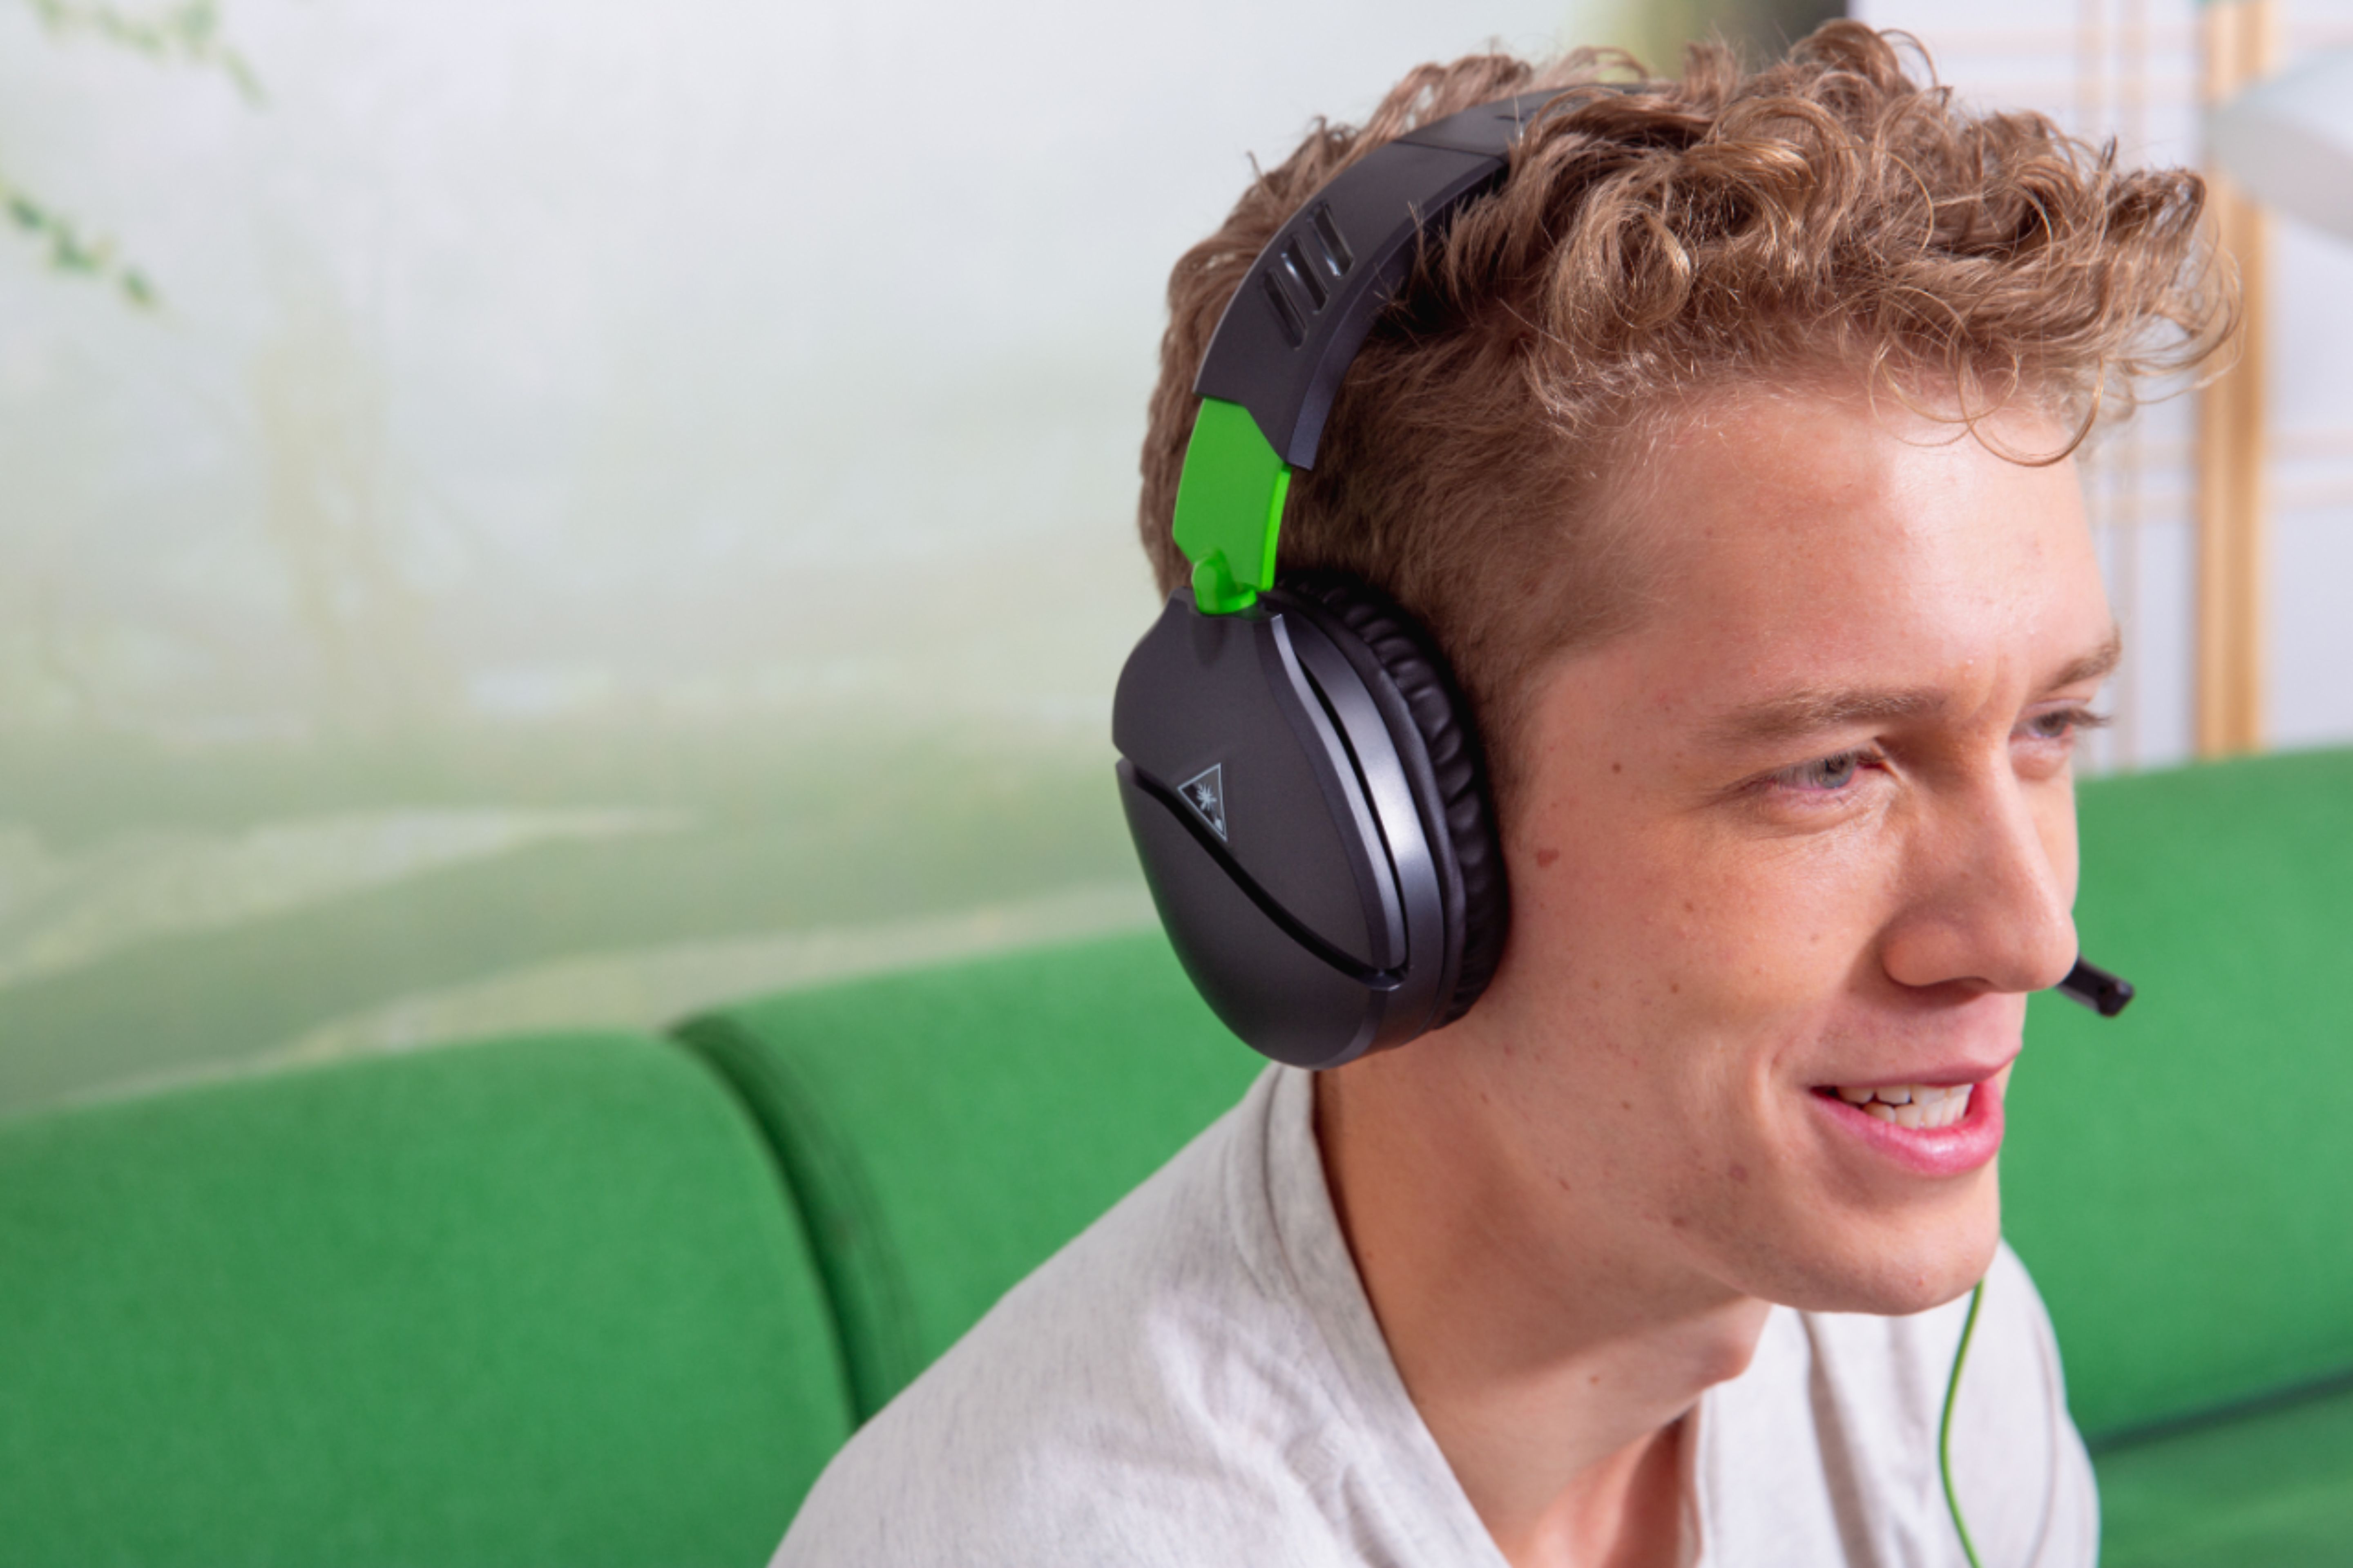 xbox ear force recon 70